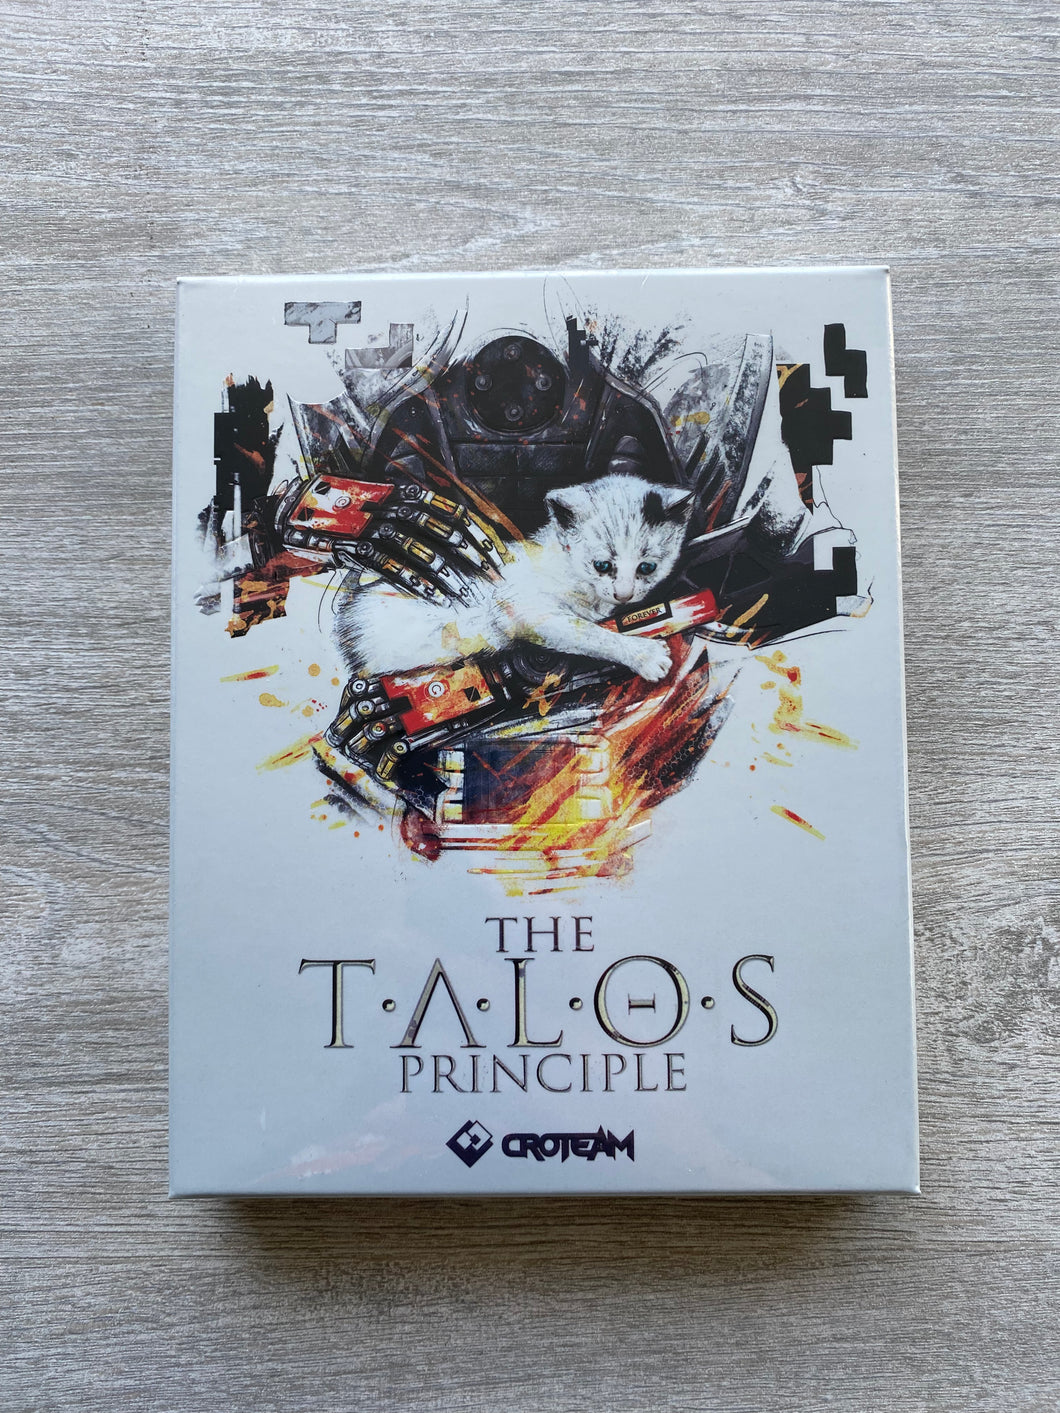 The talos principle SCS / Special reserve games / Switch / 5000 copies